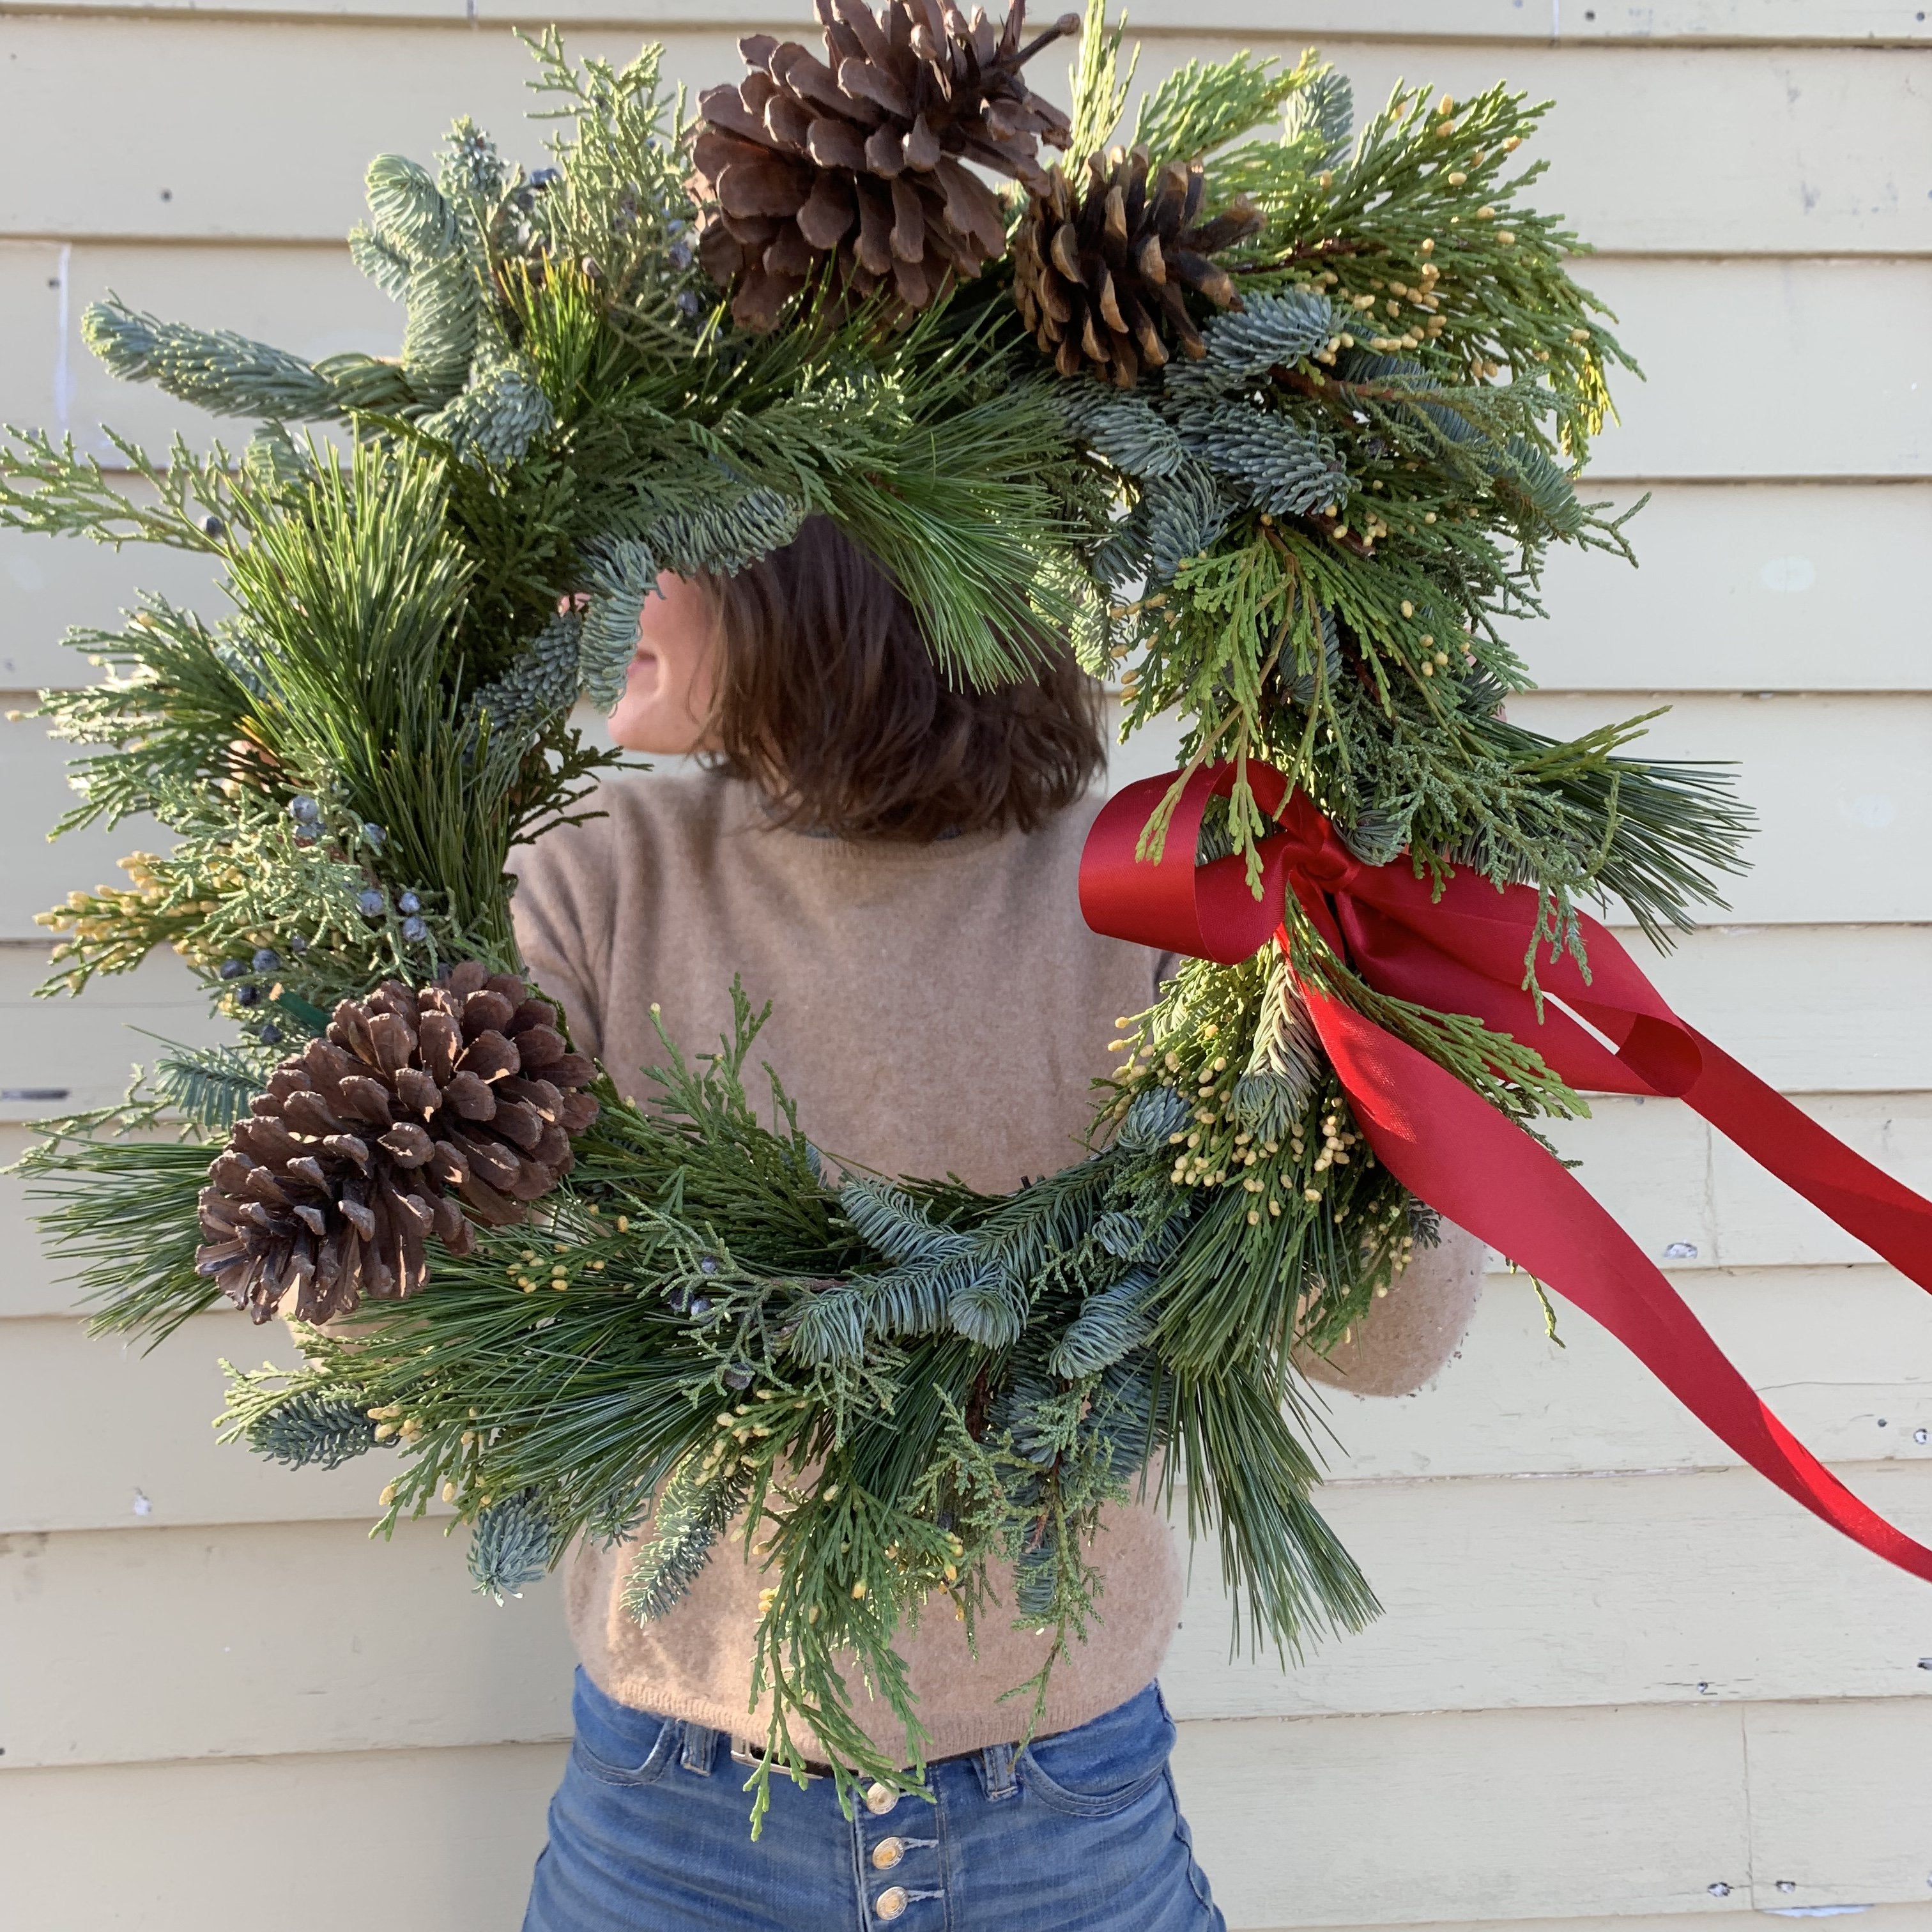 brunette woman holding a homemade holiday wreath